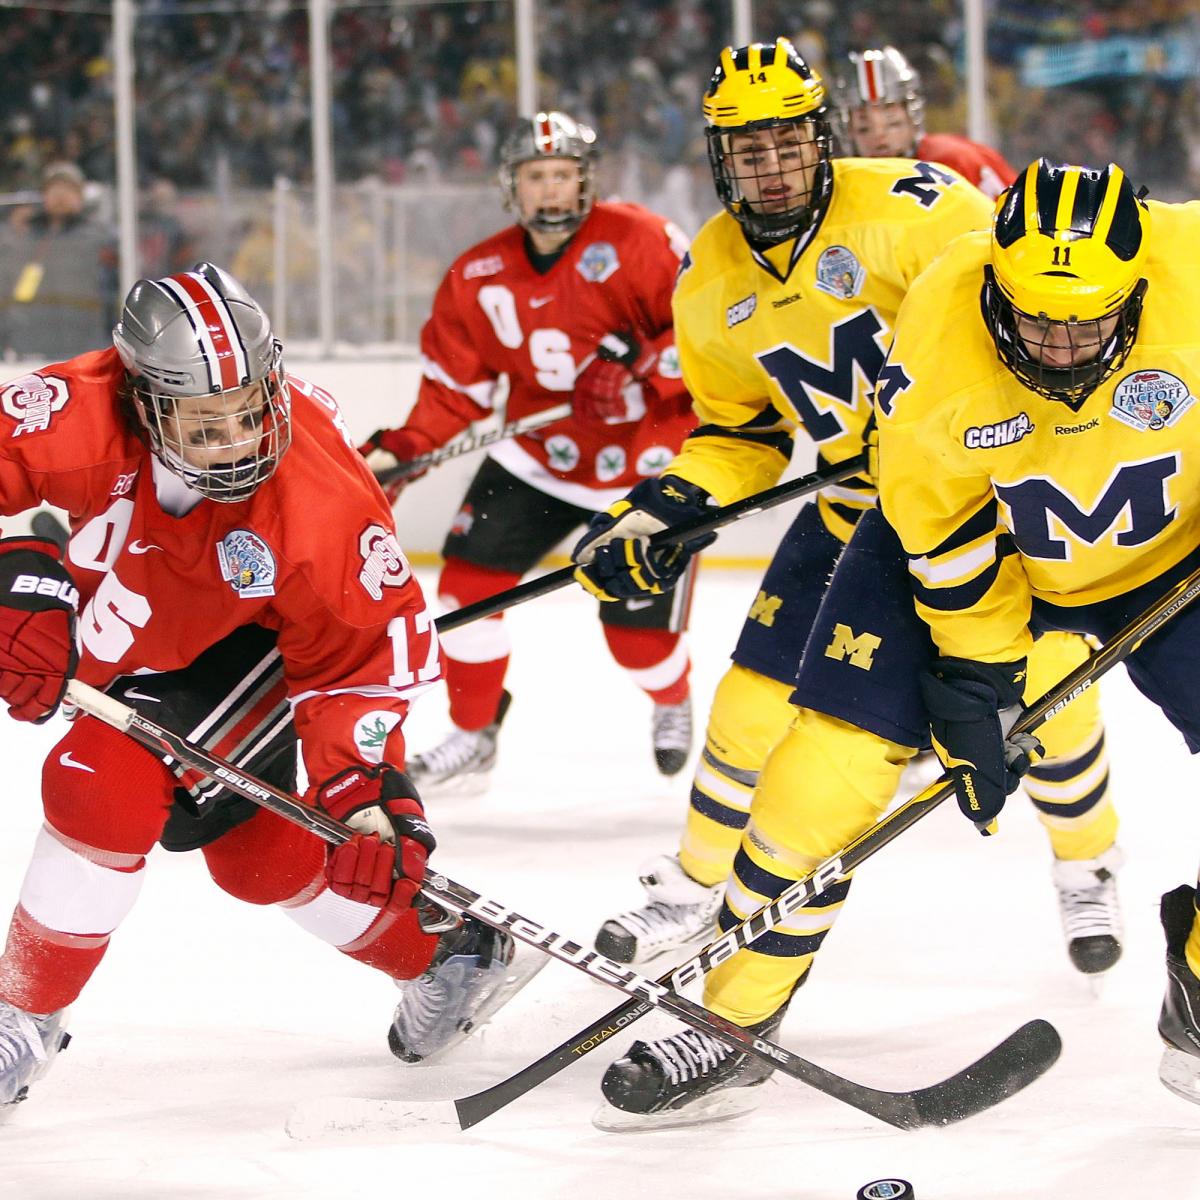 NCAA: Are Outdoor College Hockey Games Getting to Be Overkill